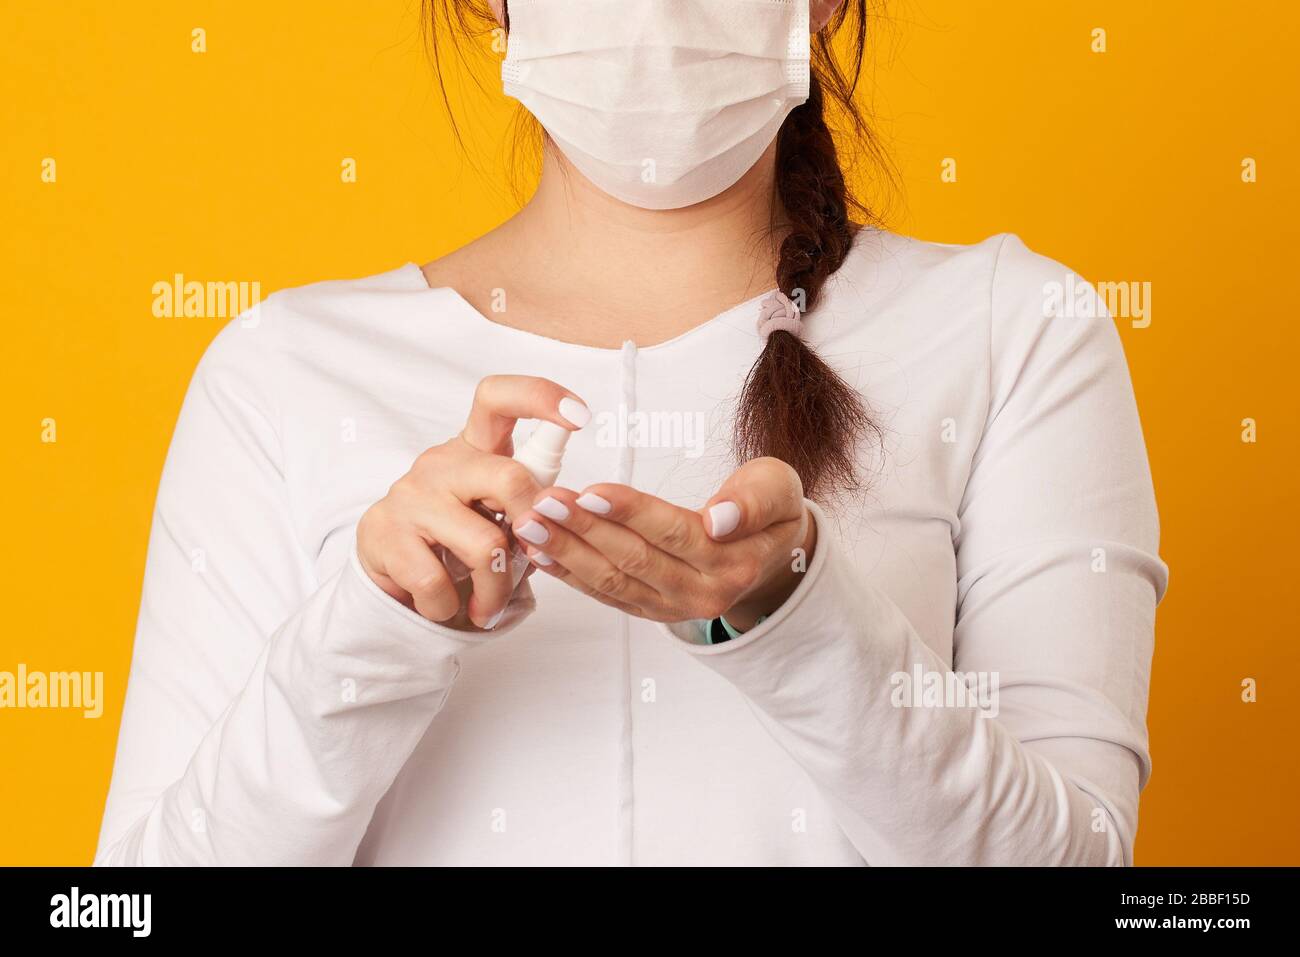 Woman is using antiseptic for hands. Concept of hygiene, protect of virus. Covid-19 Corona Prevention Measures. Stock Photo